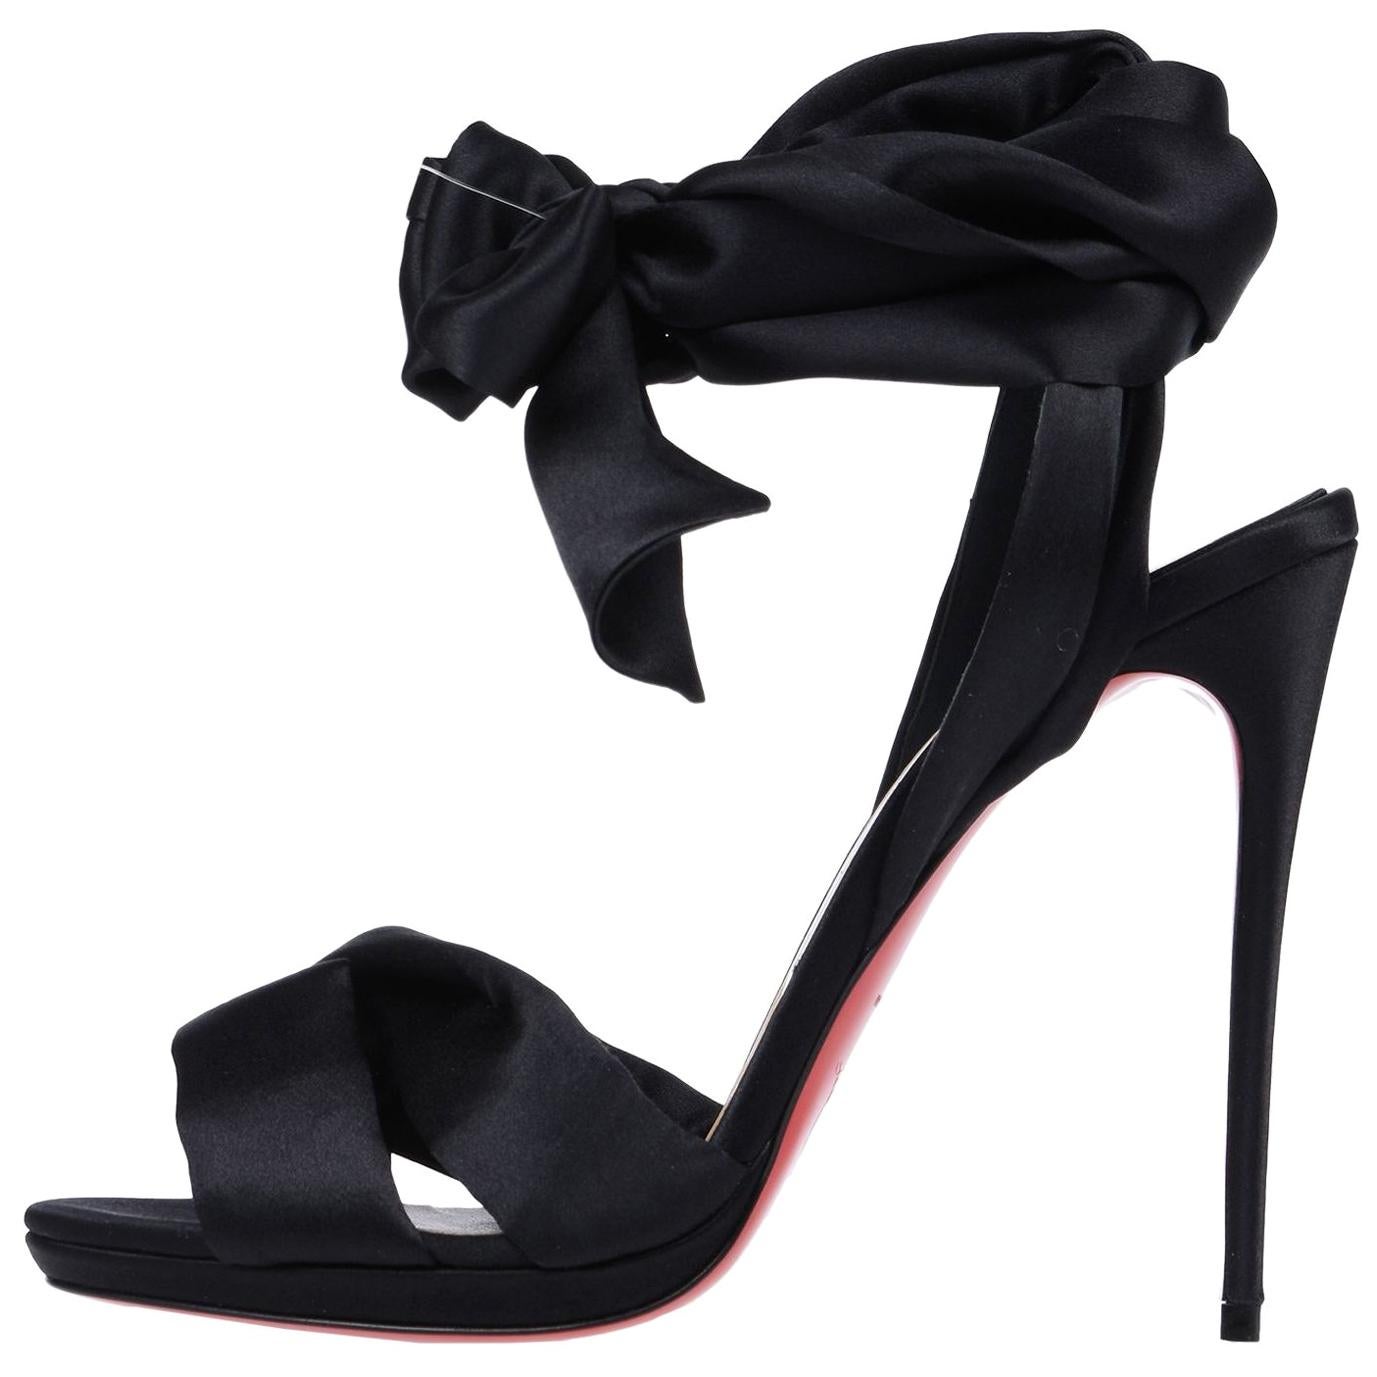 Christian Louboutin NEW Black Satin Bow Evening Sandals Pumps Heels in Box 